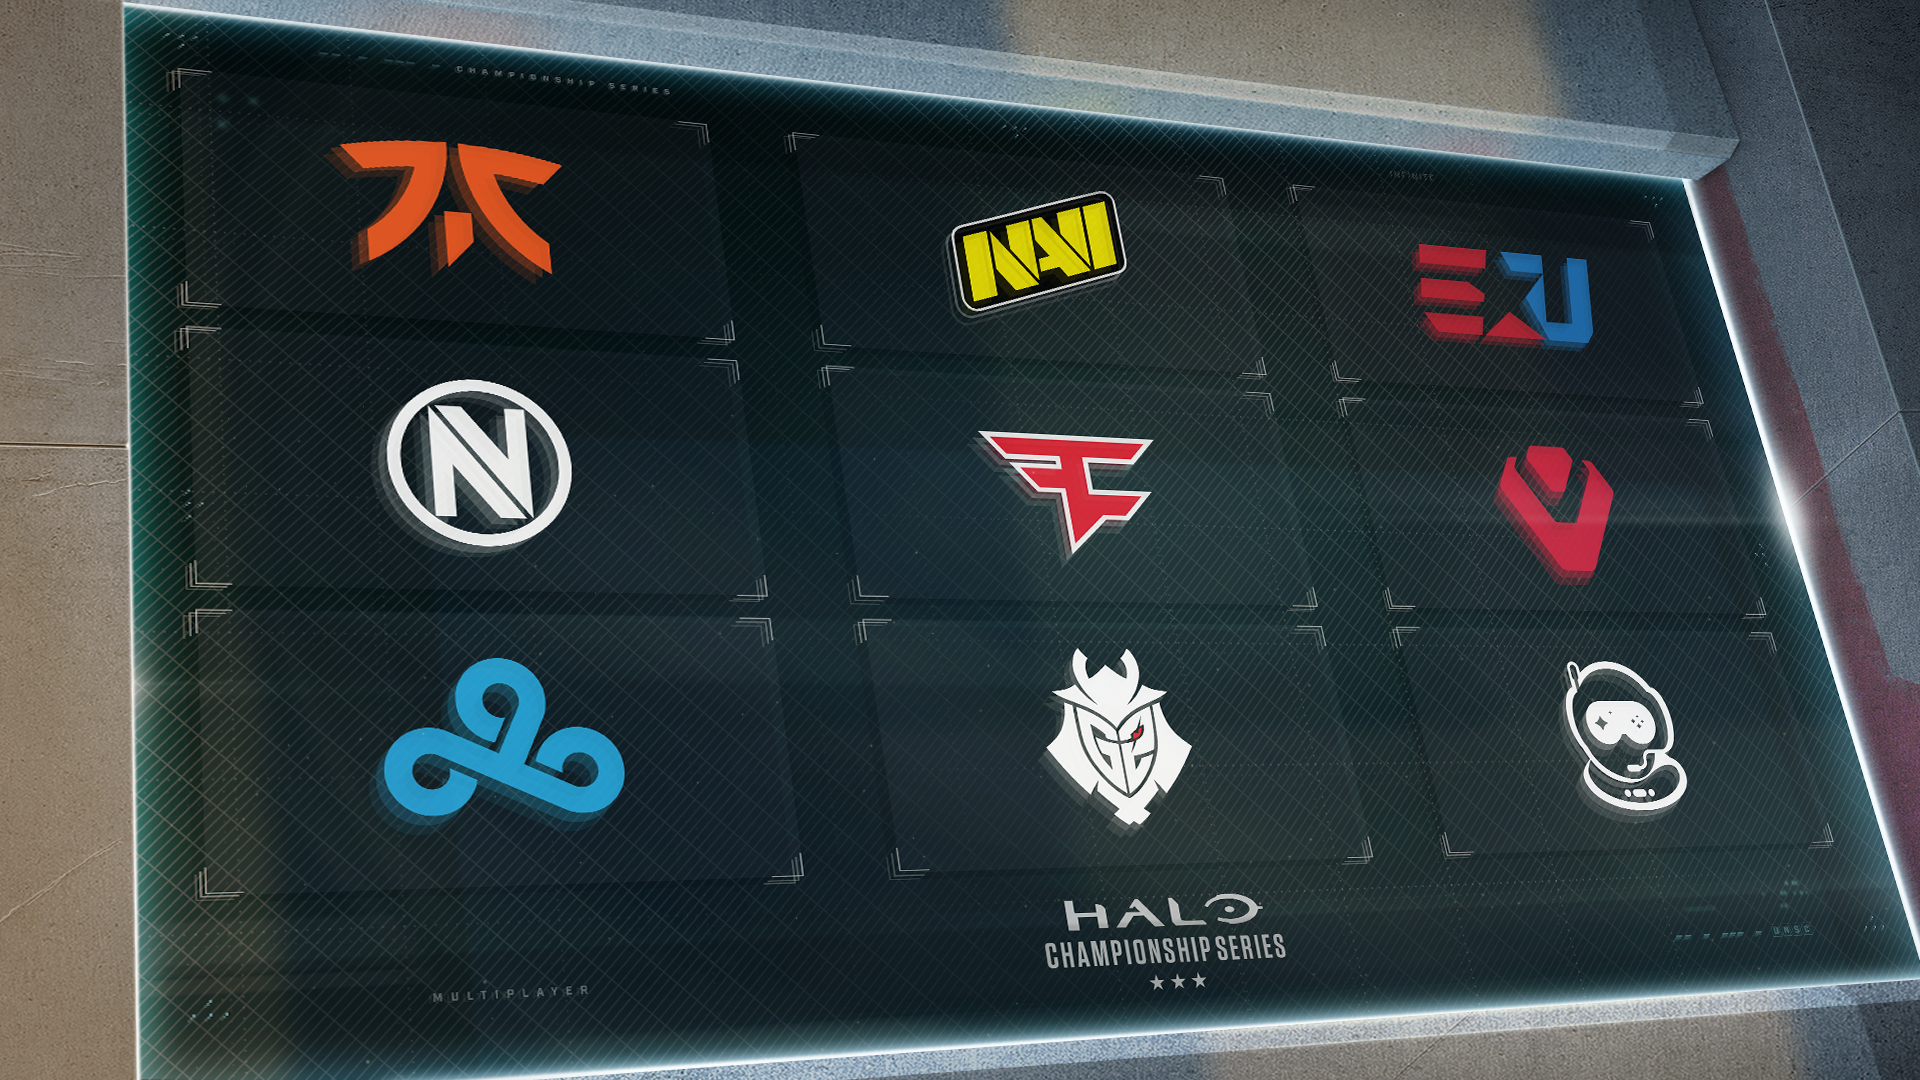 Halo Championship Series launch partners and their team logos